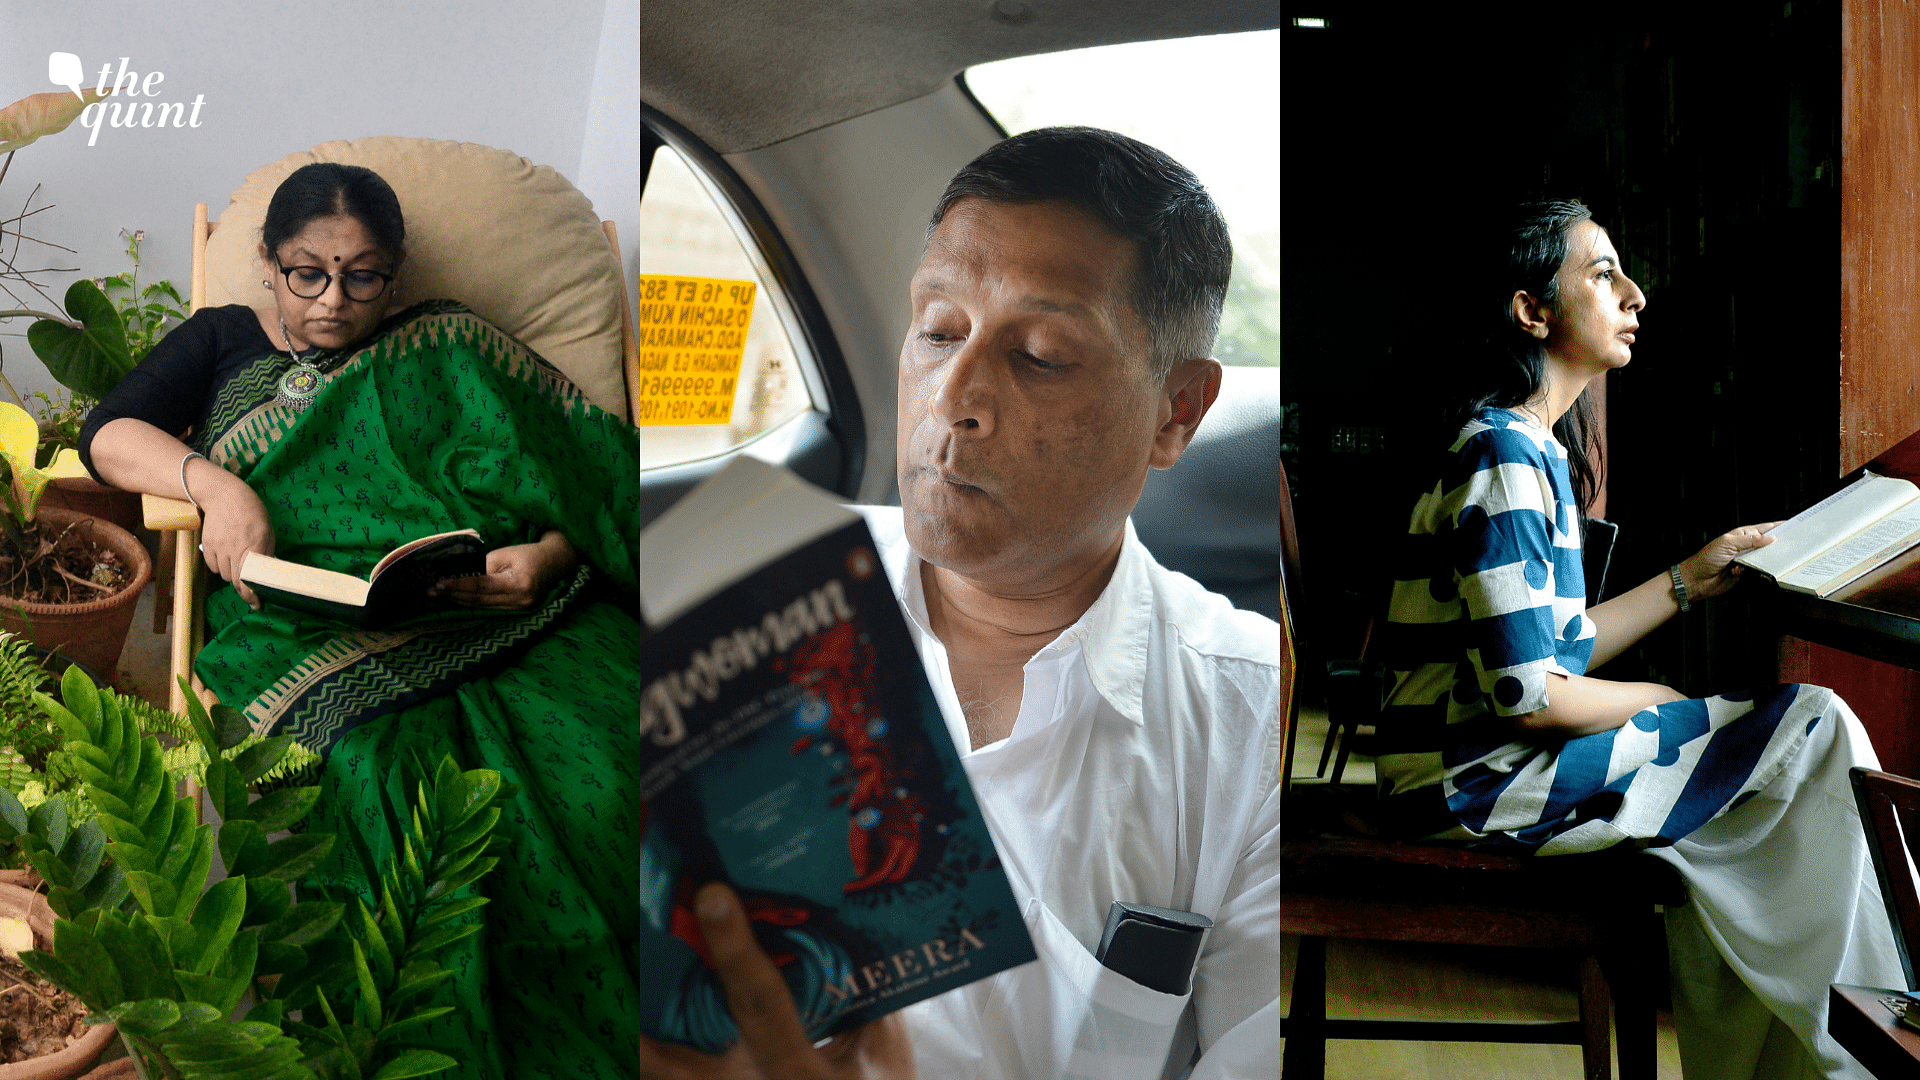 ‘Reading Spaces’, a photo series by Saswata Bhattacharya, takes for its subjects the 2019 jury of the JCB Prize for Literature.